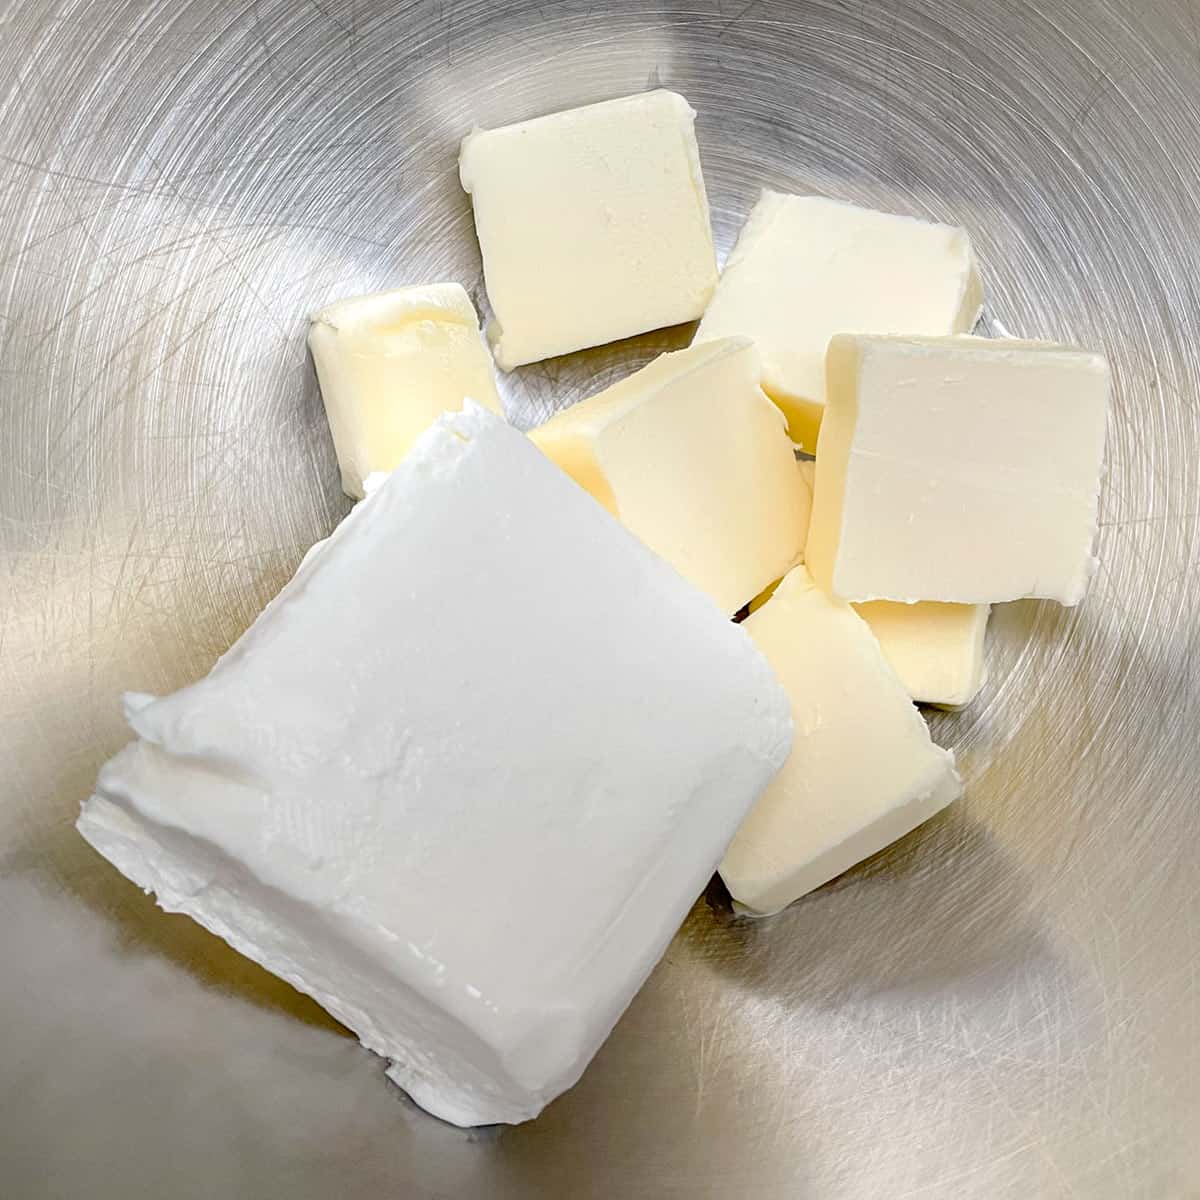 Cubed butter and a block of cream cheese in a mixer bowl.